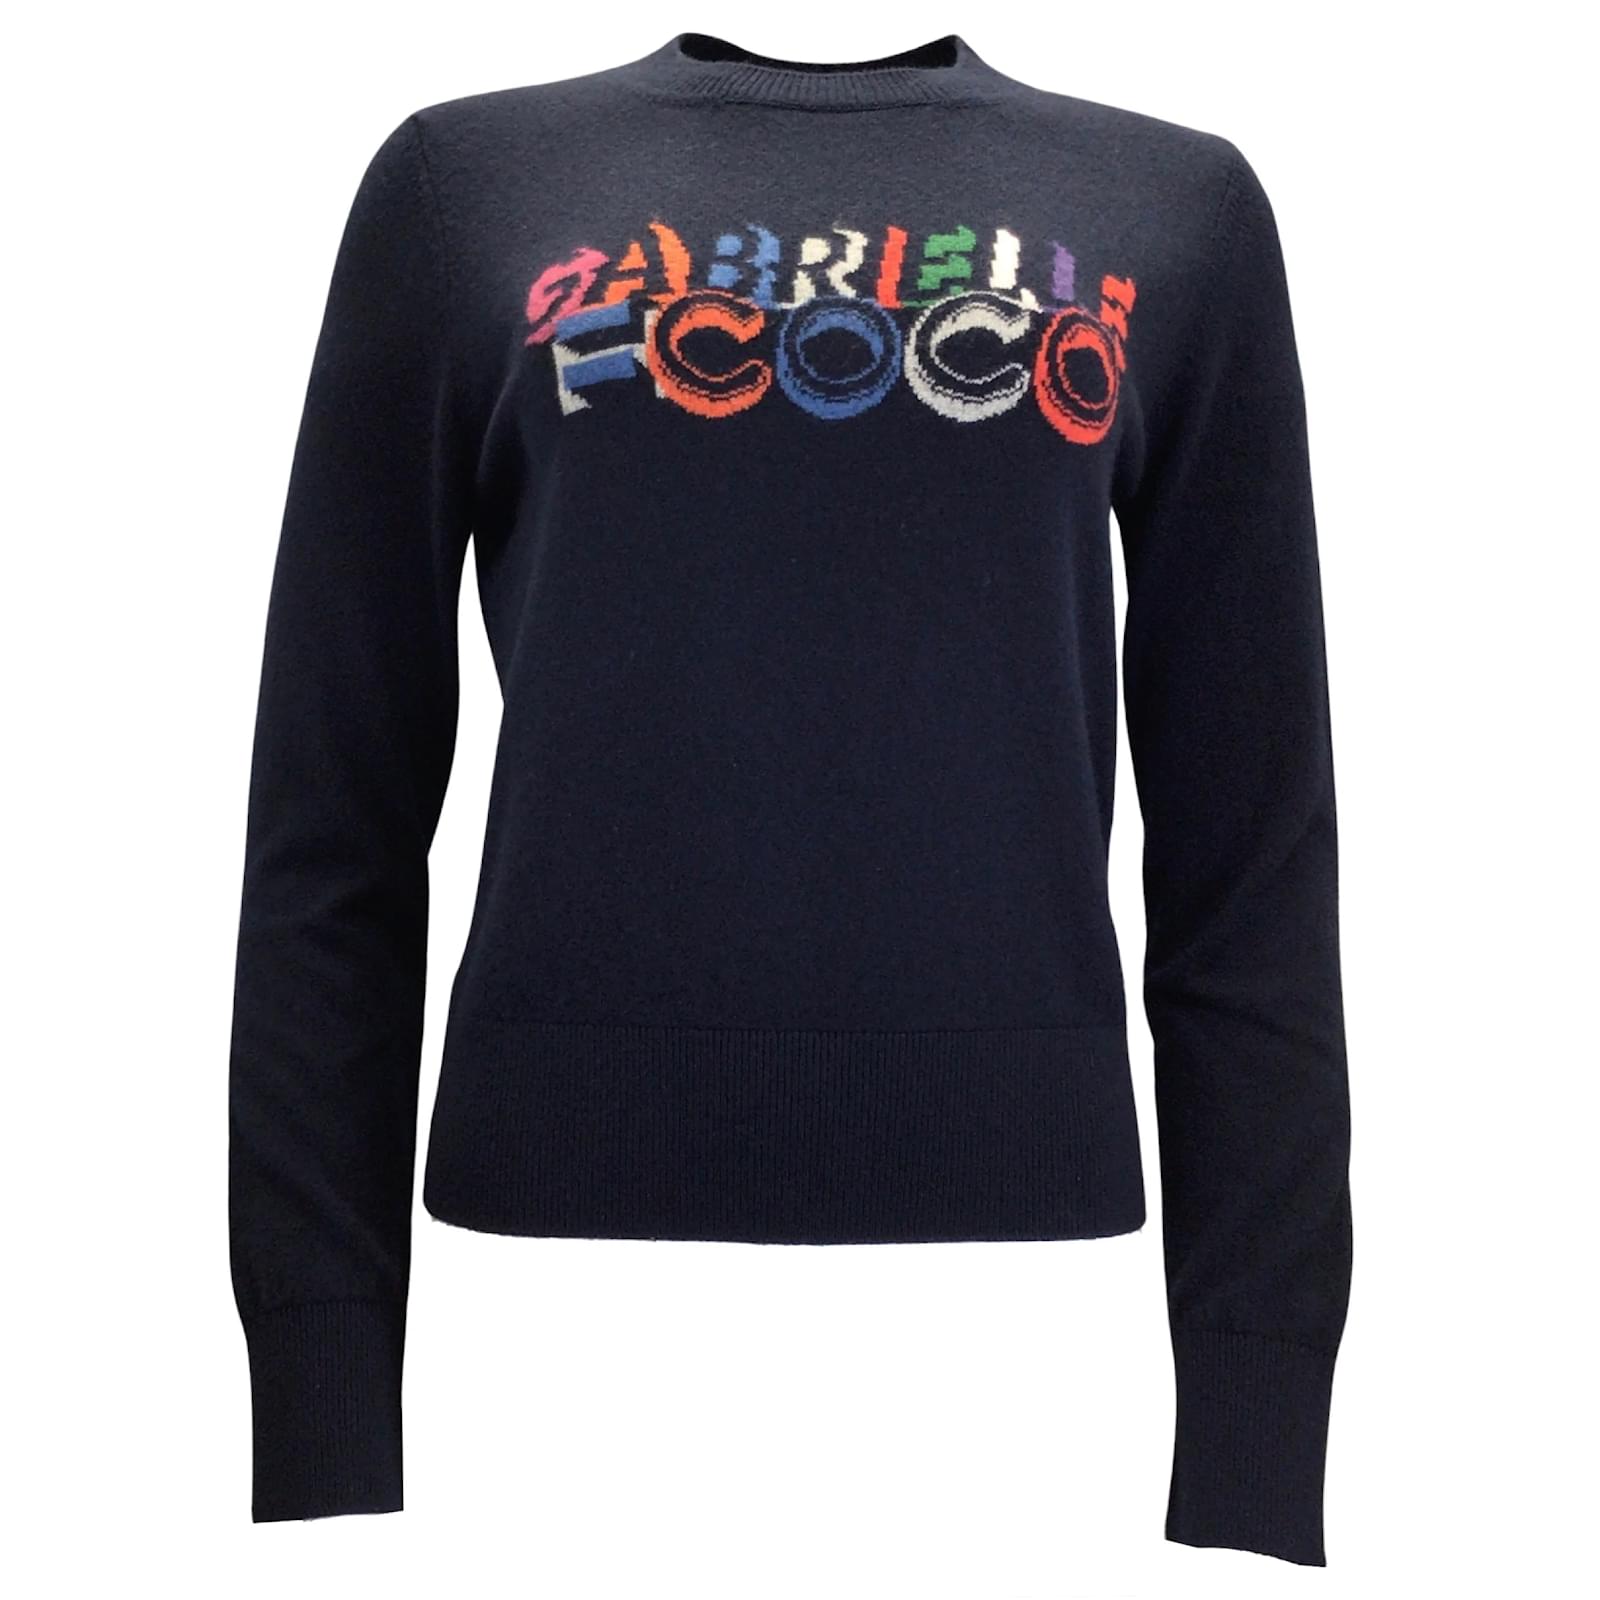 Chanel Navy Blue Multi Gabrielle Coco Long Sleeved Crewneck